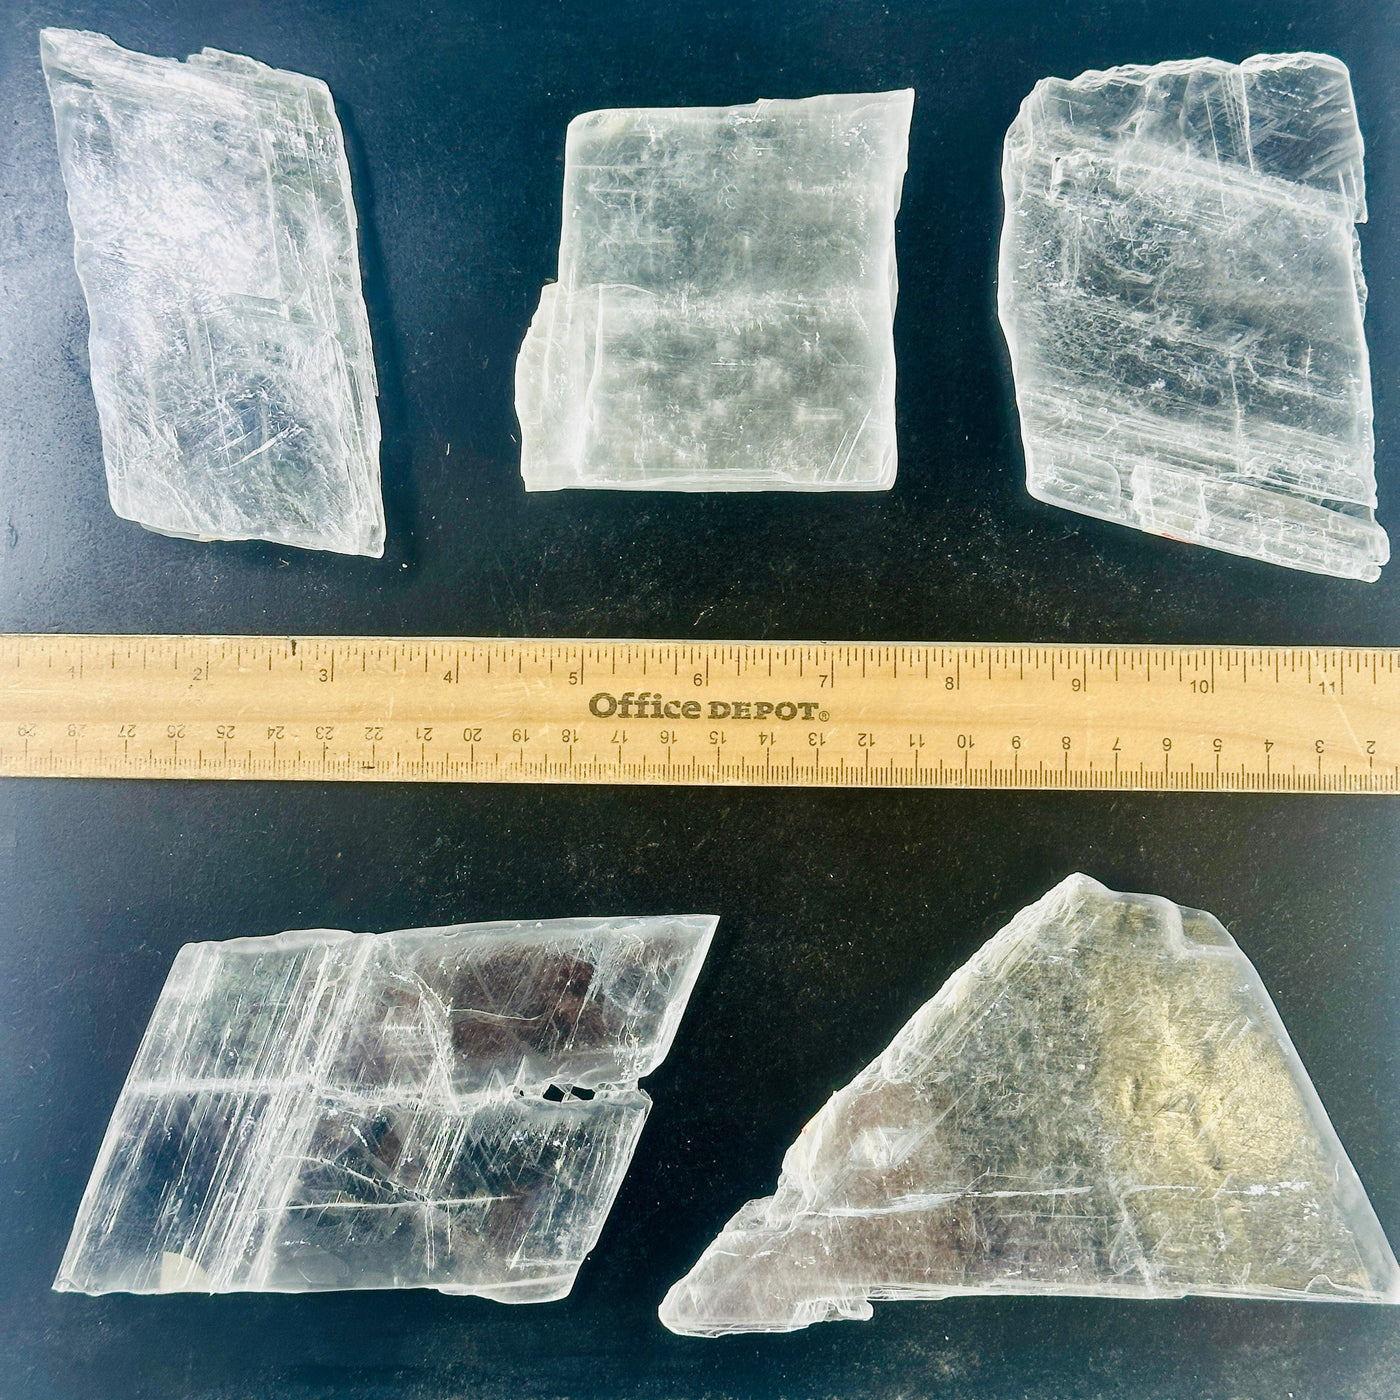 Selenite Slab - You Choose all variants with ruler for size reference